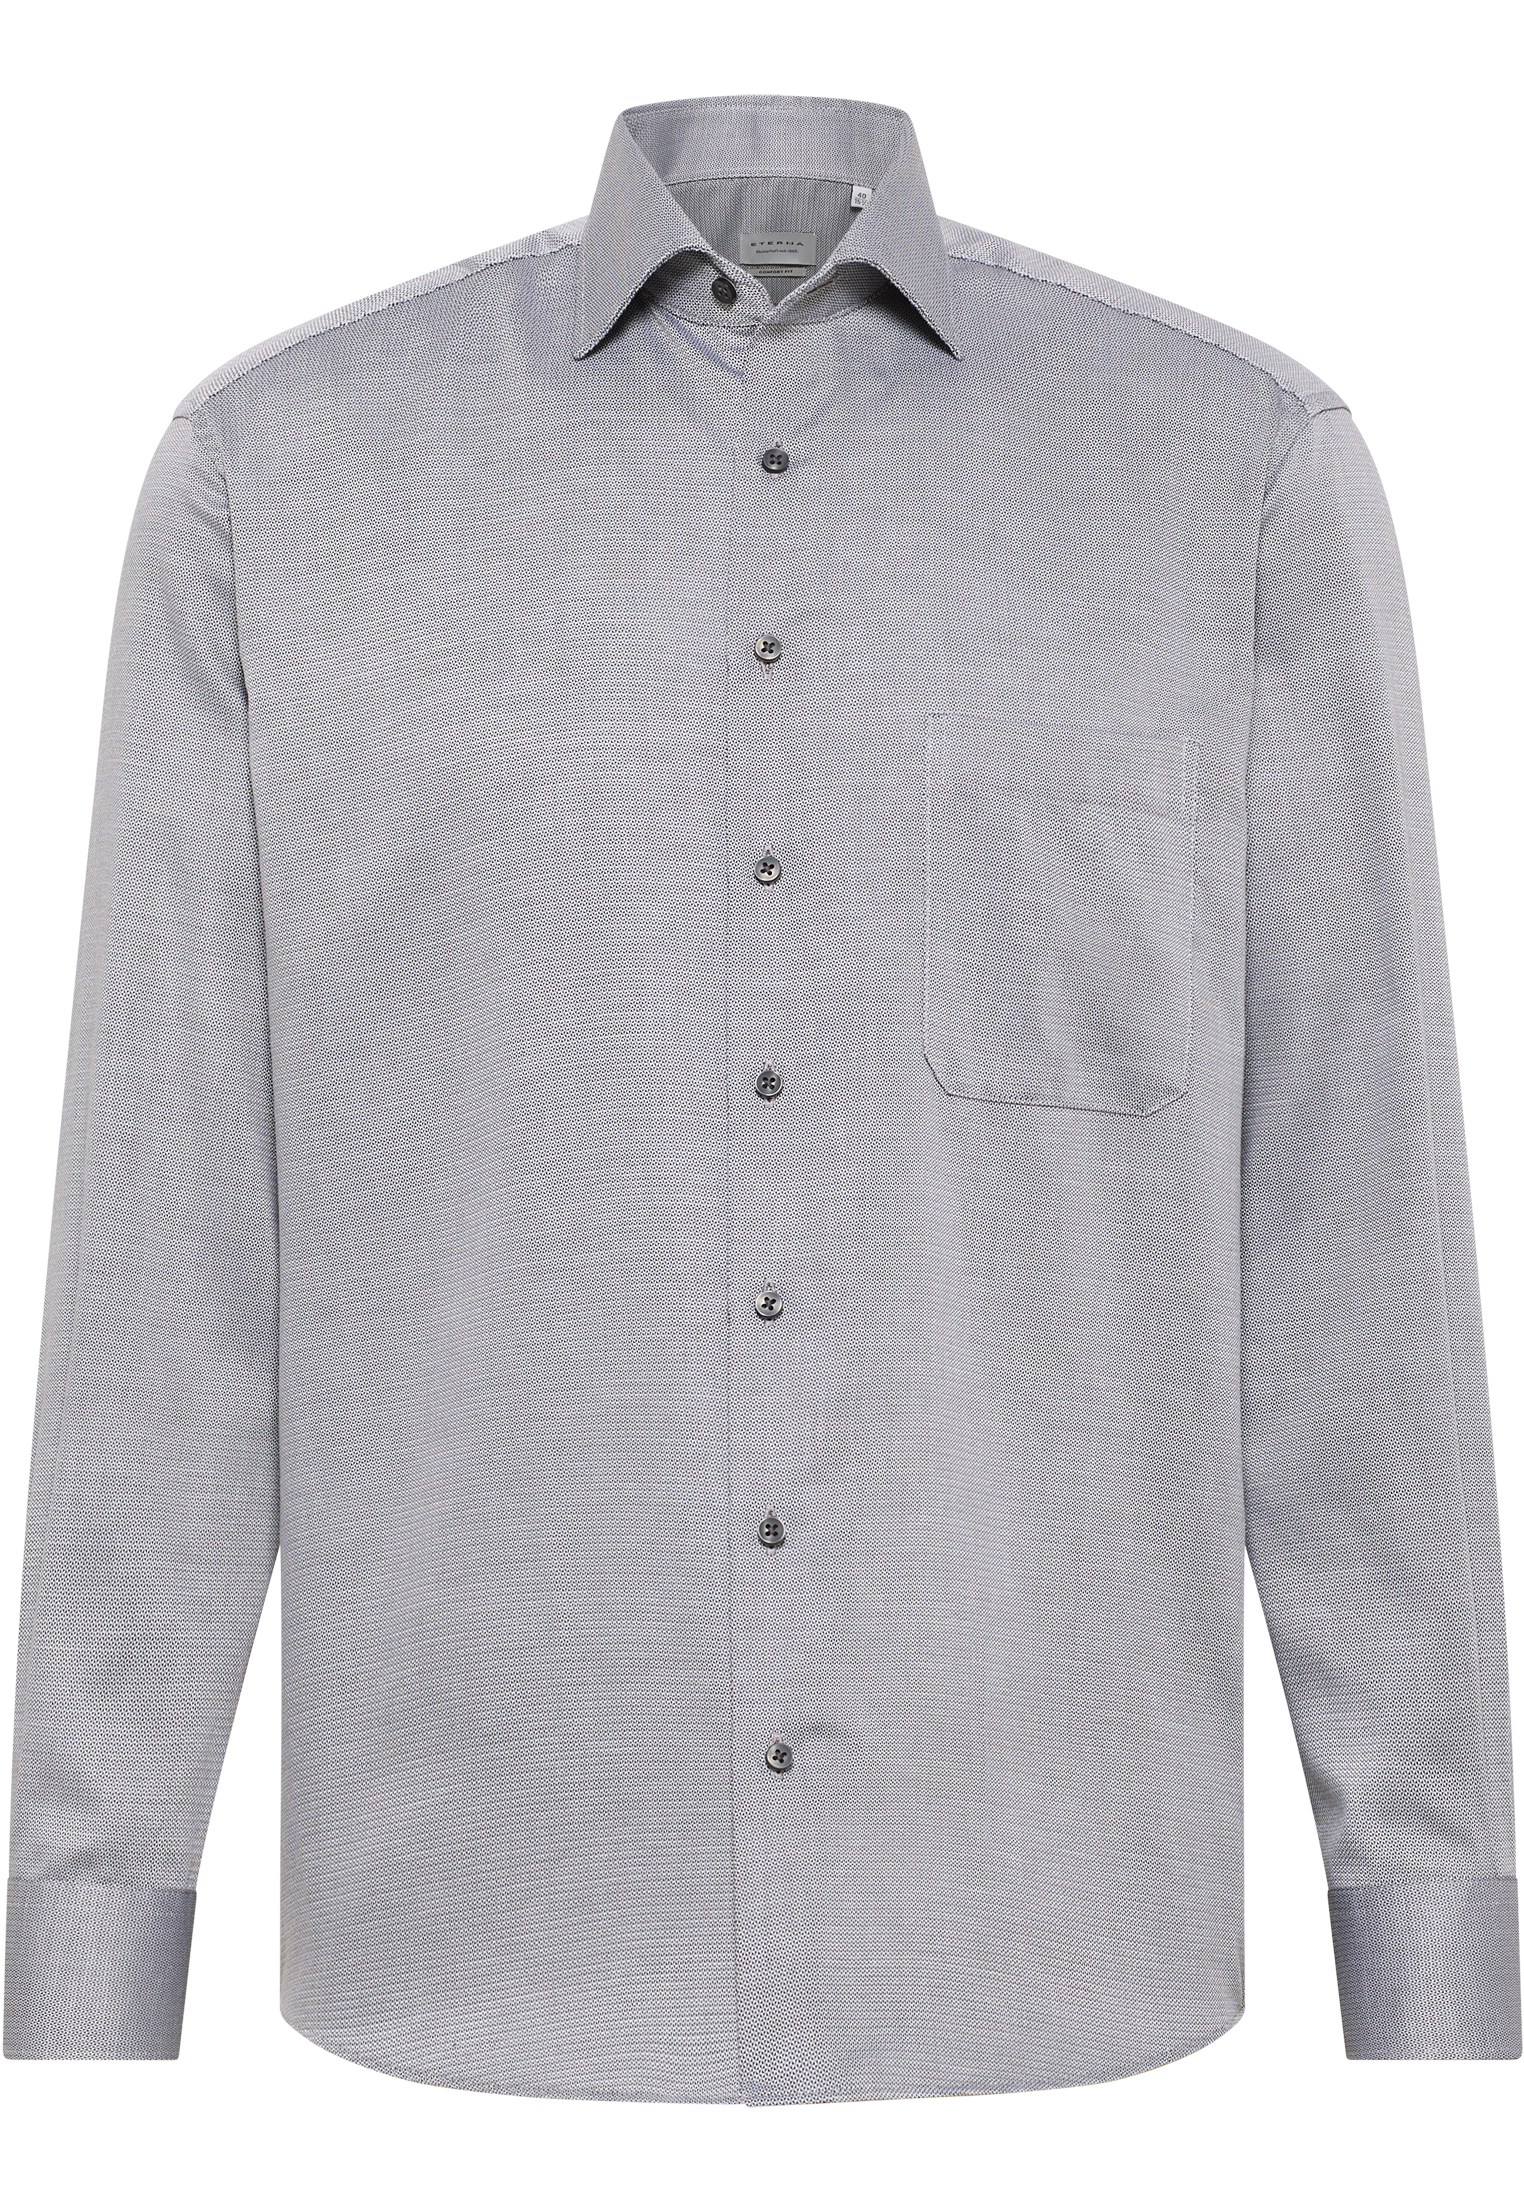 COMFORT FIT Shirt in anthracite structured